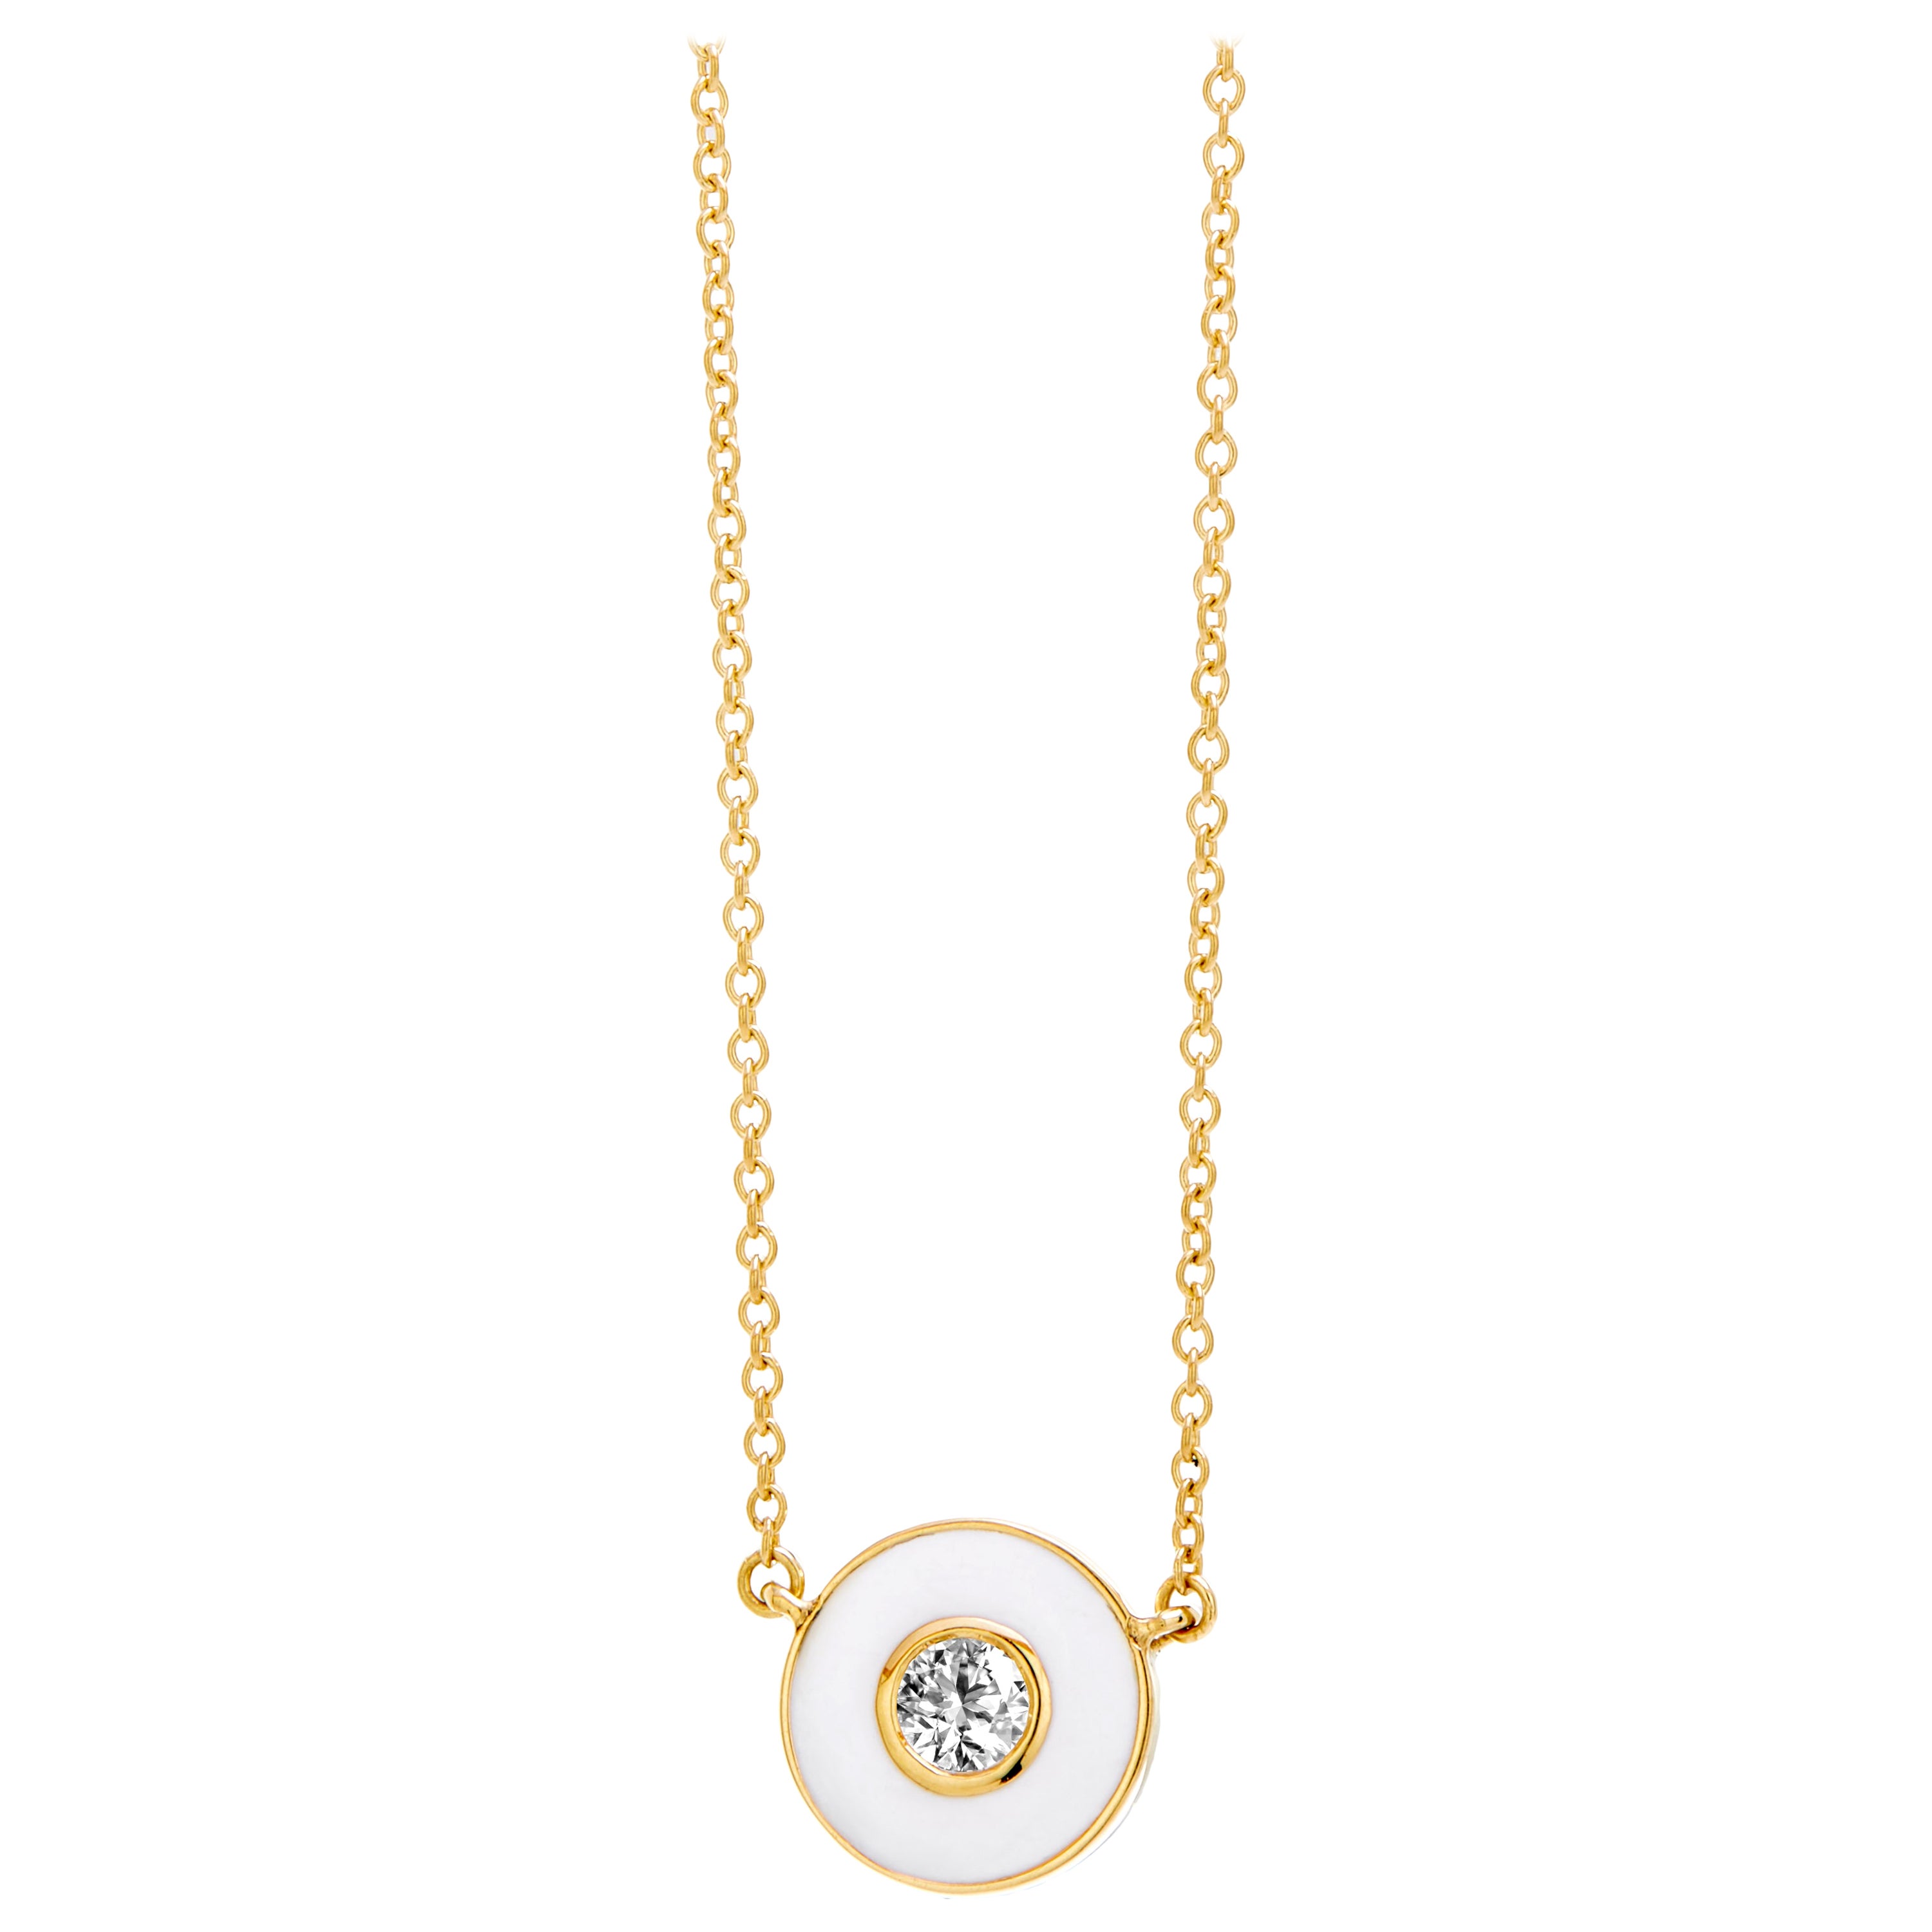 Syna Yellow Gold Cosmic Necklace with White Enamel and Diamonds